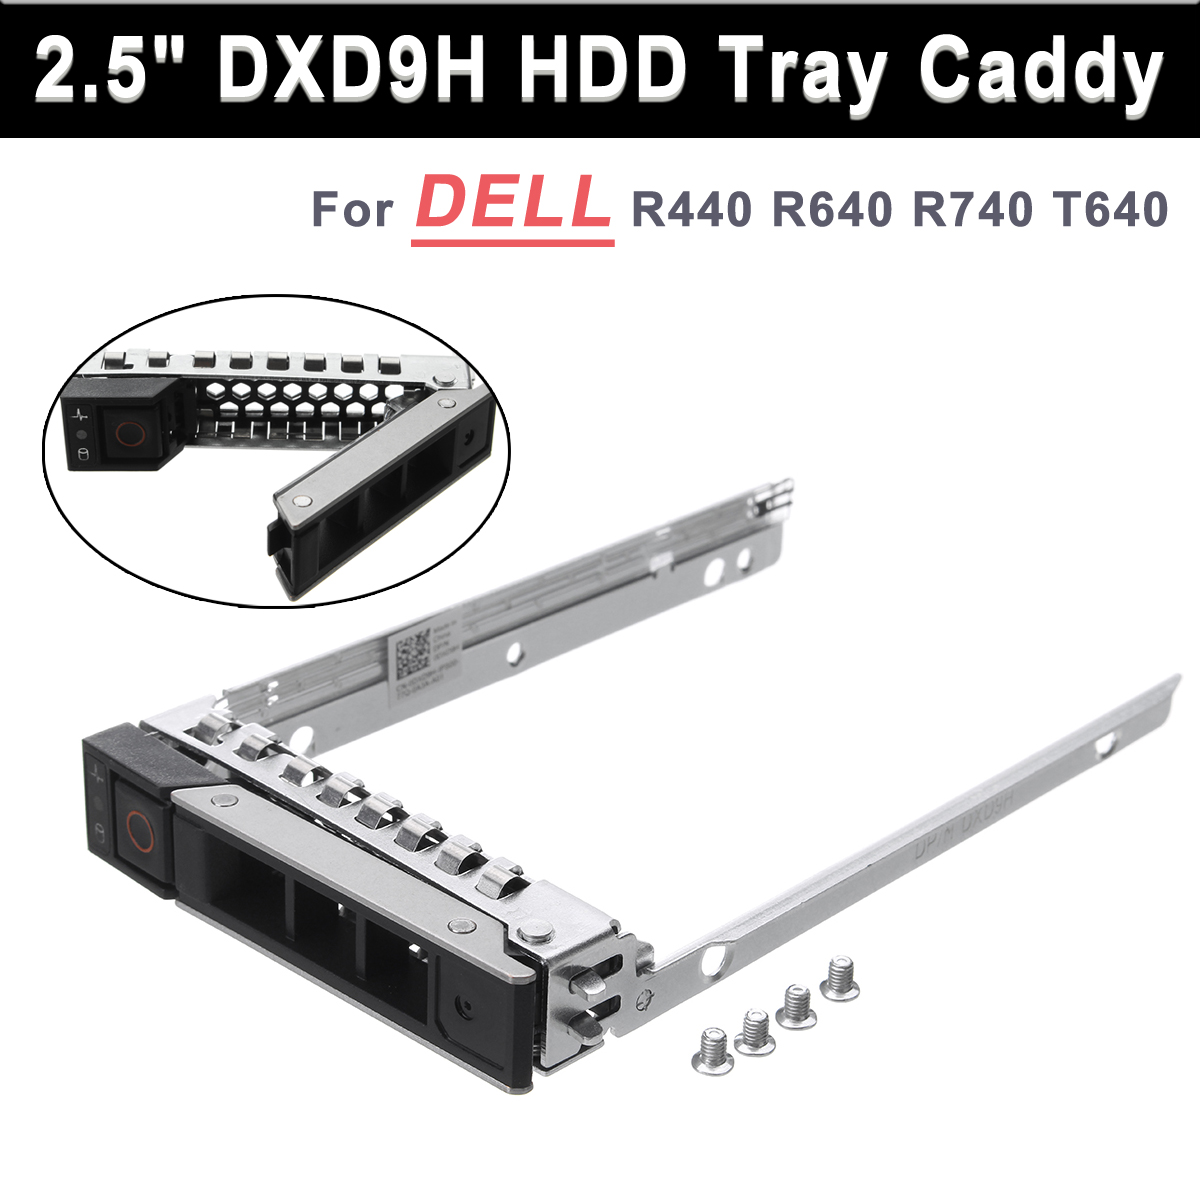 25-HDD-Tray-Caddy-for-Dell-DXD9H-Poweredge-Server-R640-R740-R740XD-R7415-R940-Adapter-1373241